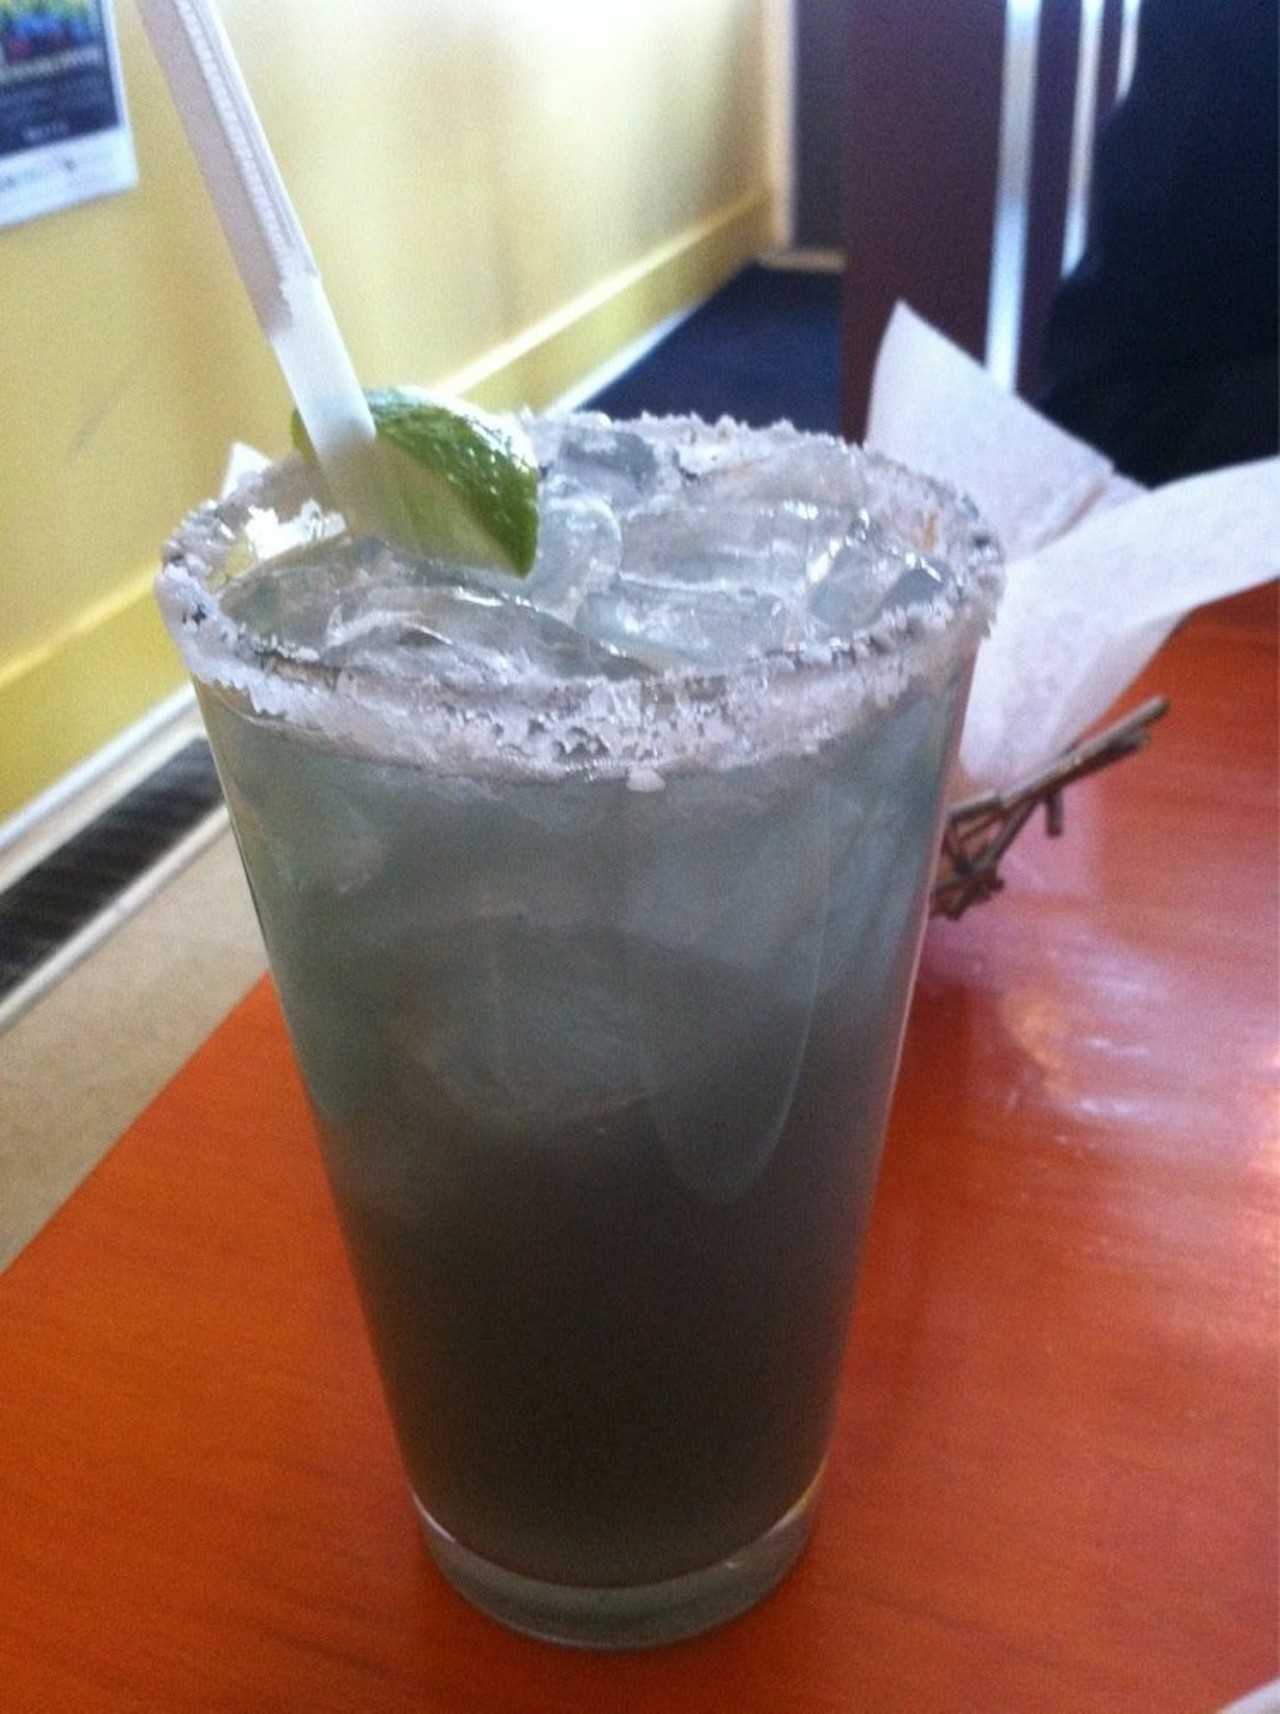 Lavender and Lime Margarita at Orale! Kitchen 
1834 W 25th St